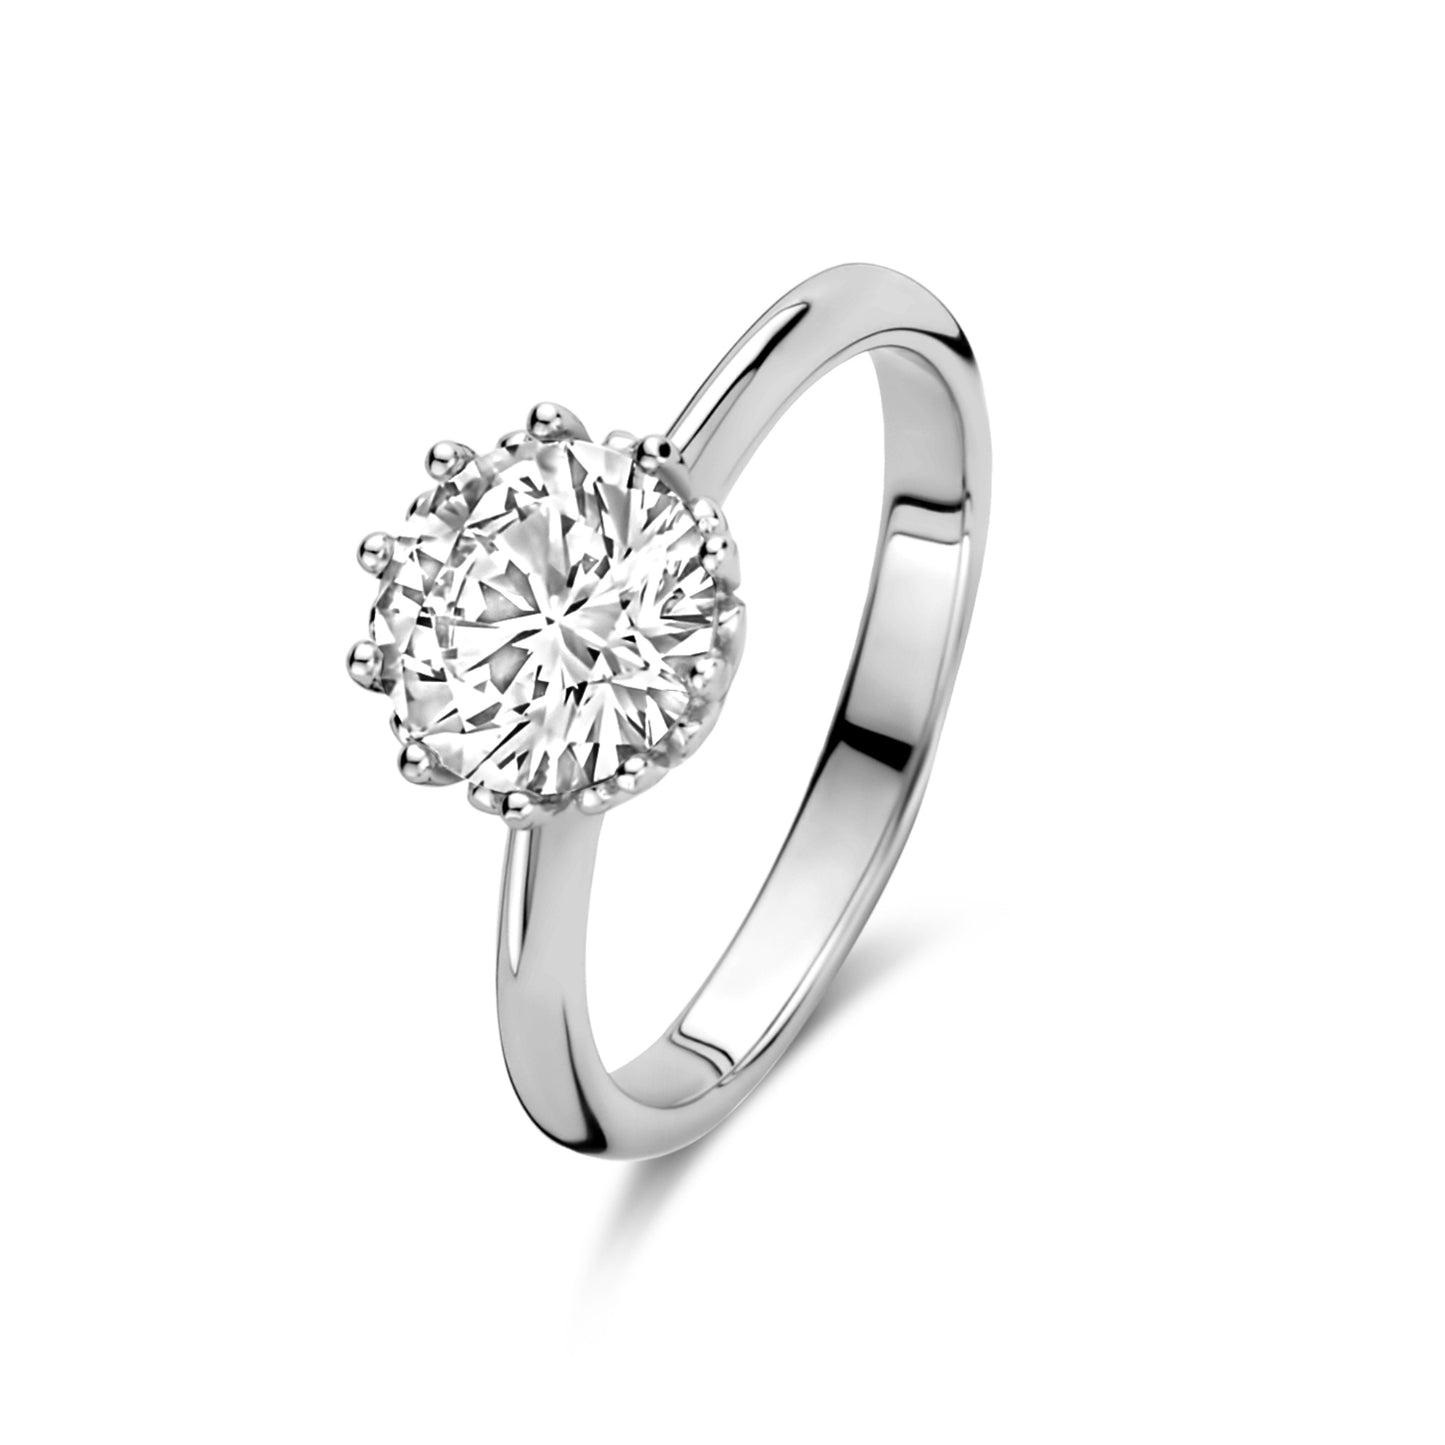 Cento Luci Maxima 925 Sterling Silber Ring